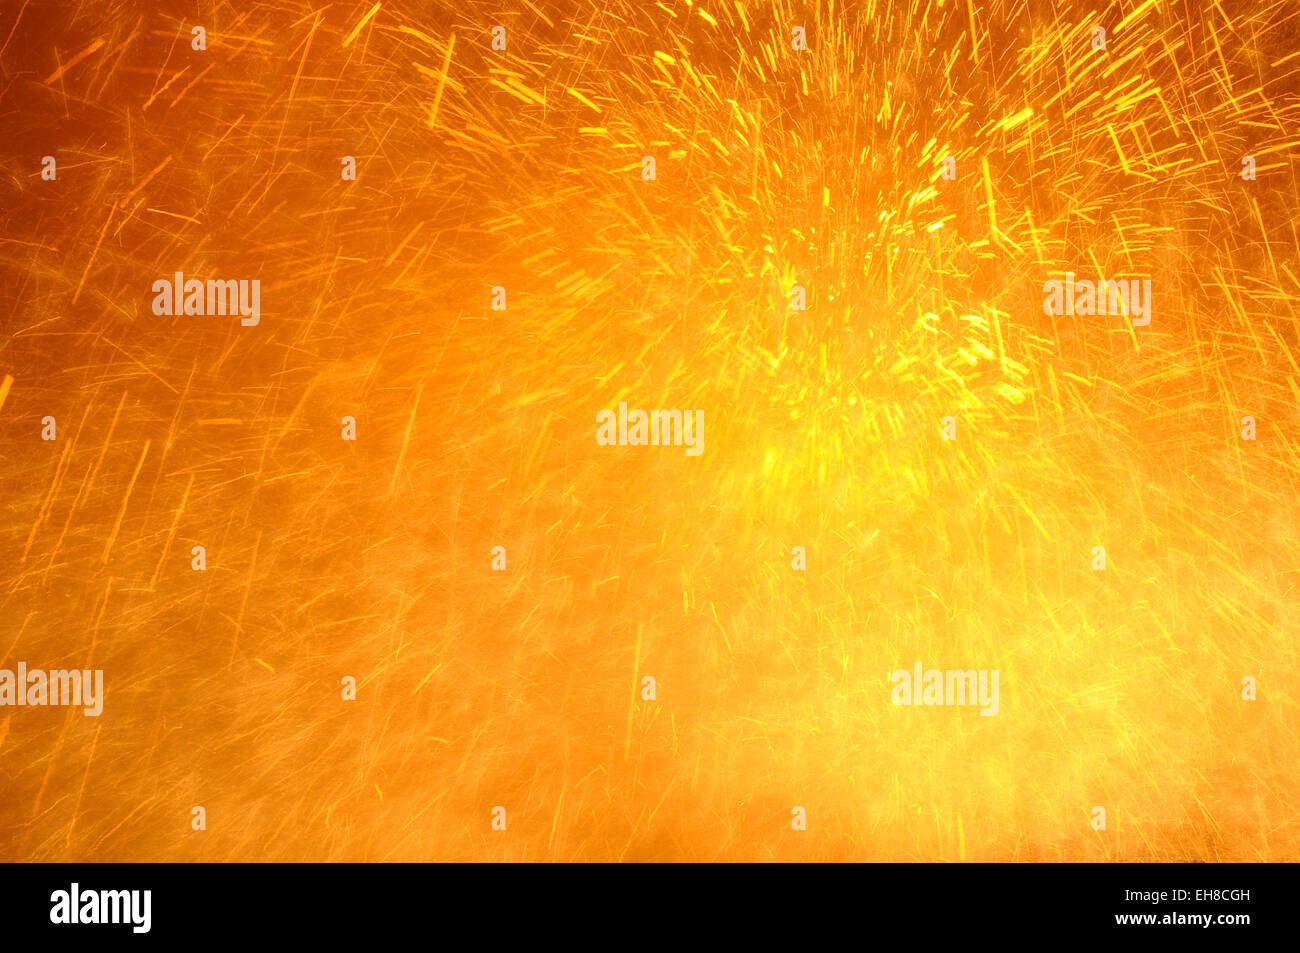 Golden Yellow Fire Spark Background Stock Photo